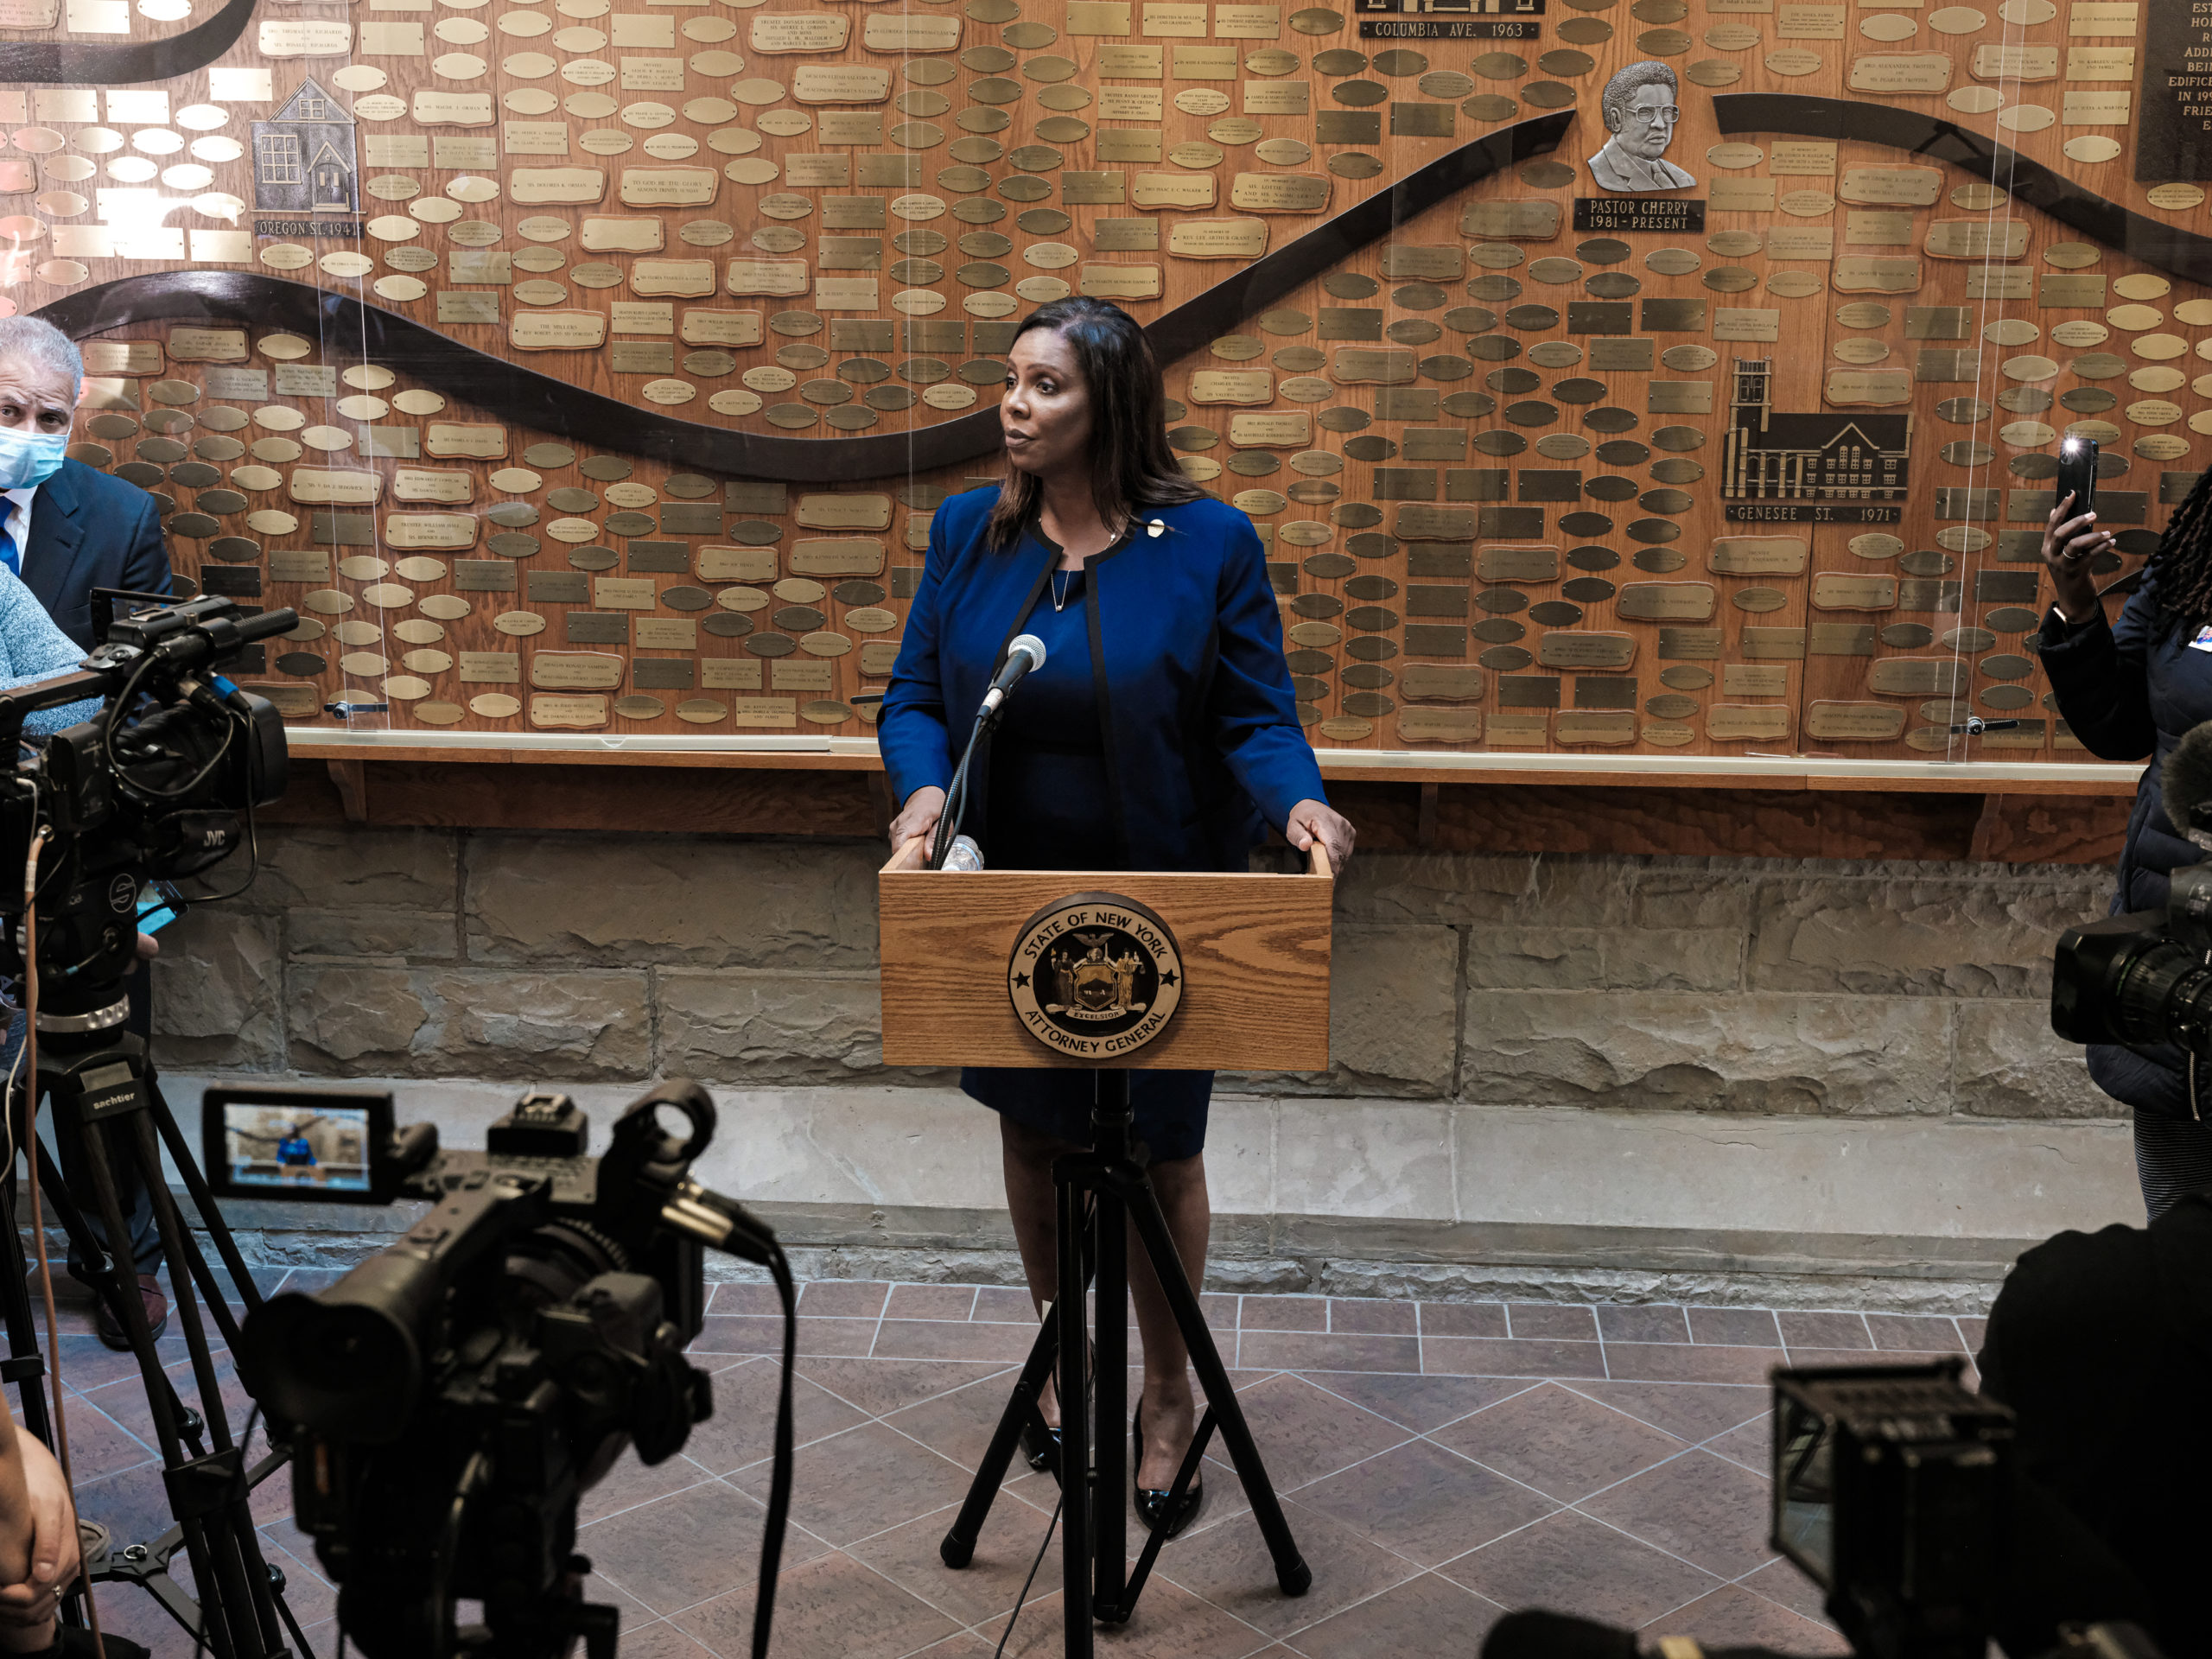 New York State Attorney General Letitia James speaks at a news conference about the ongoing investigation into the death of Daniel Prude on September 20, 2020 in Rochester, New York. (Joshua Rashaad McFadden/Getty Images)